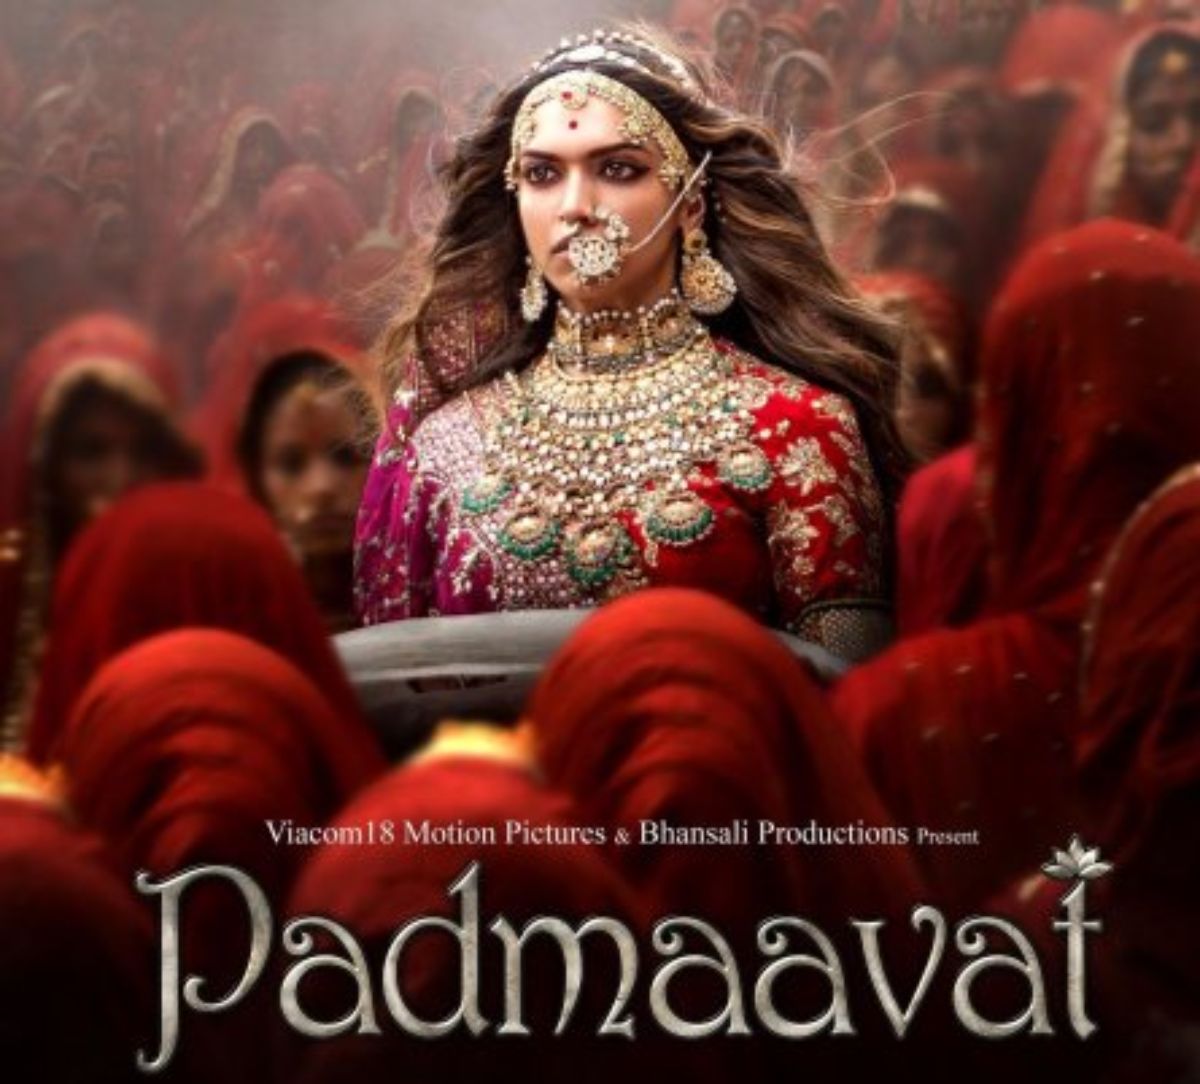 What does the movie Padmaavat teach us about entrepreneurship in India?